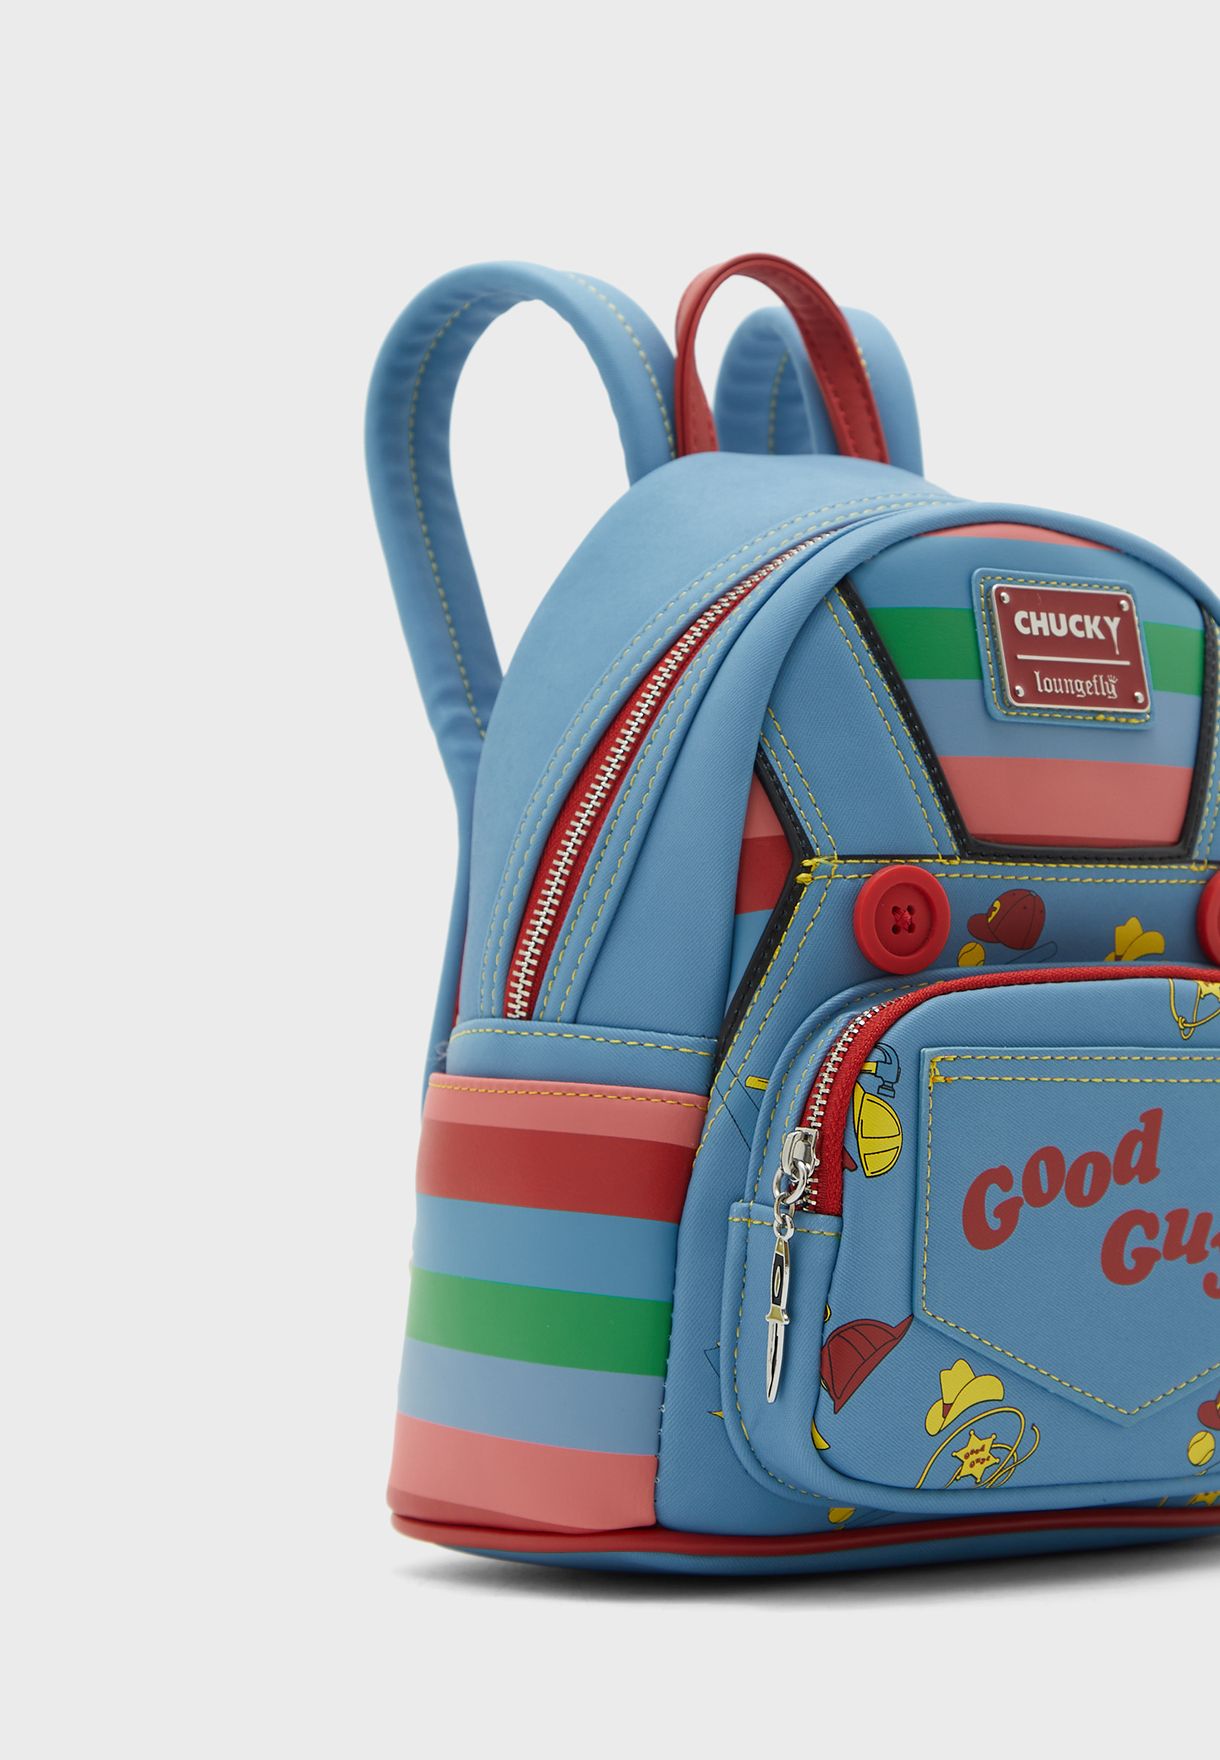 Kids Child's Play Chucky Backpack